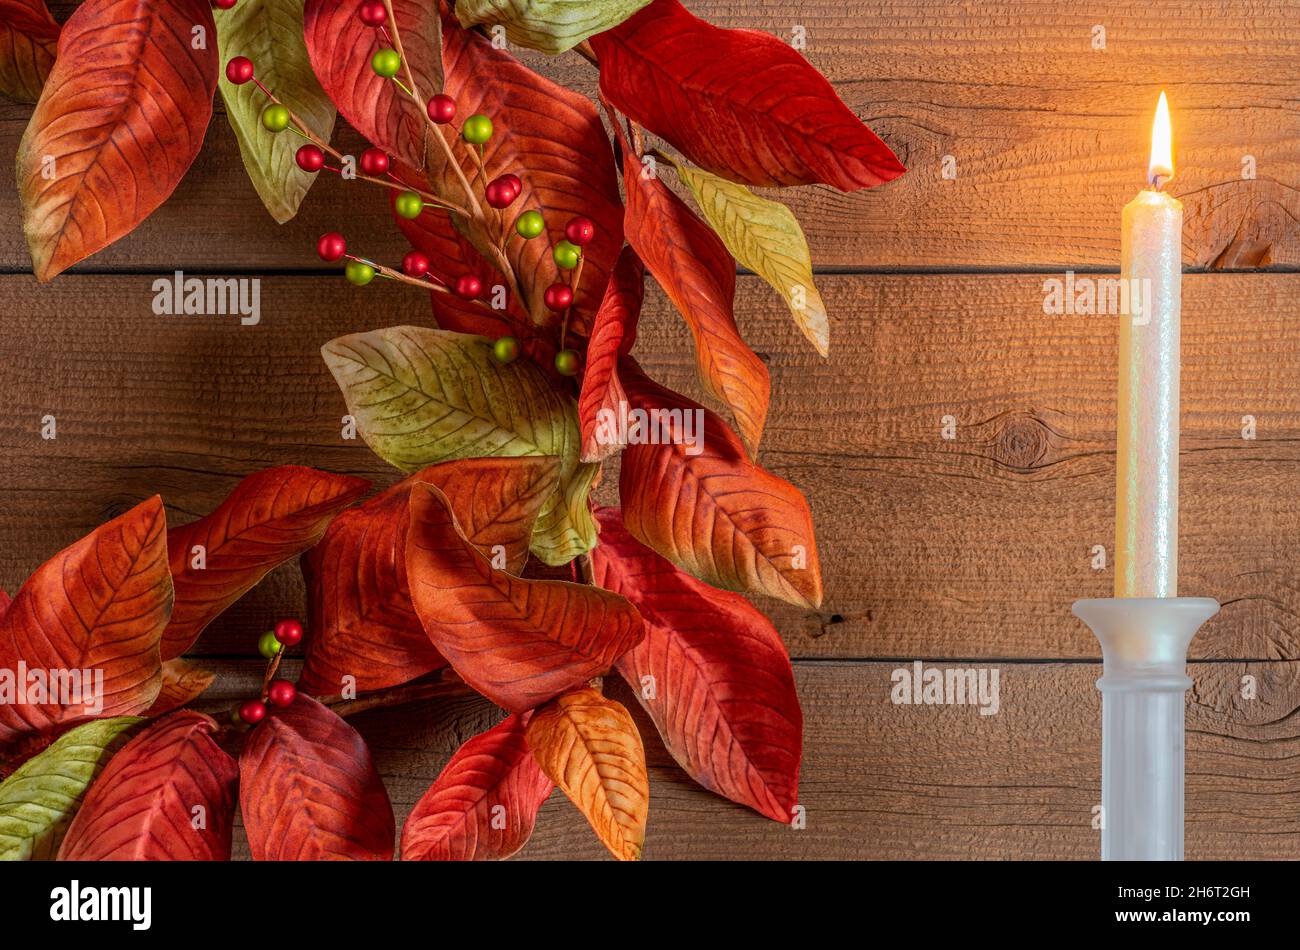 Colorful wreath in autumn and Christmas colors hangs next to a lit candle against heavily textured wood. Stock Photo